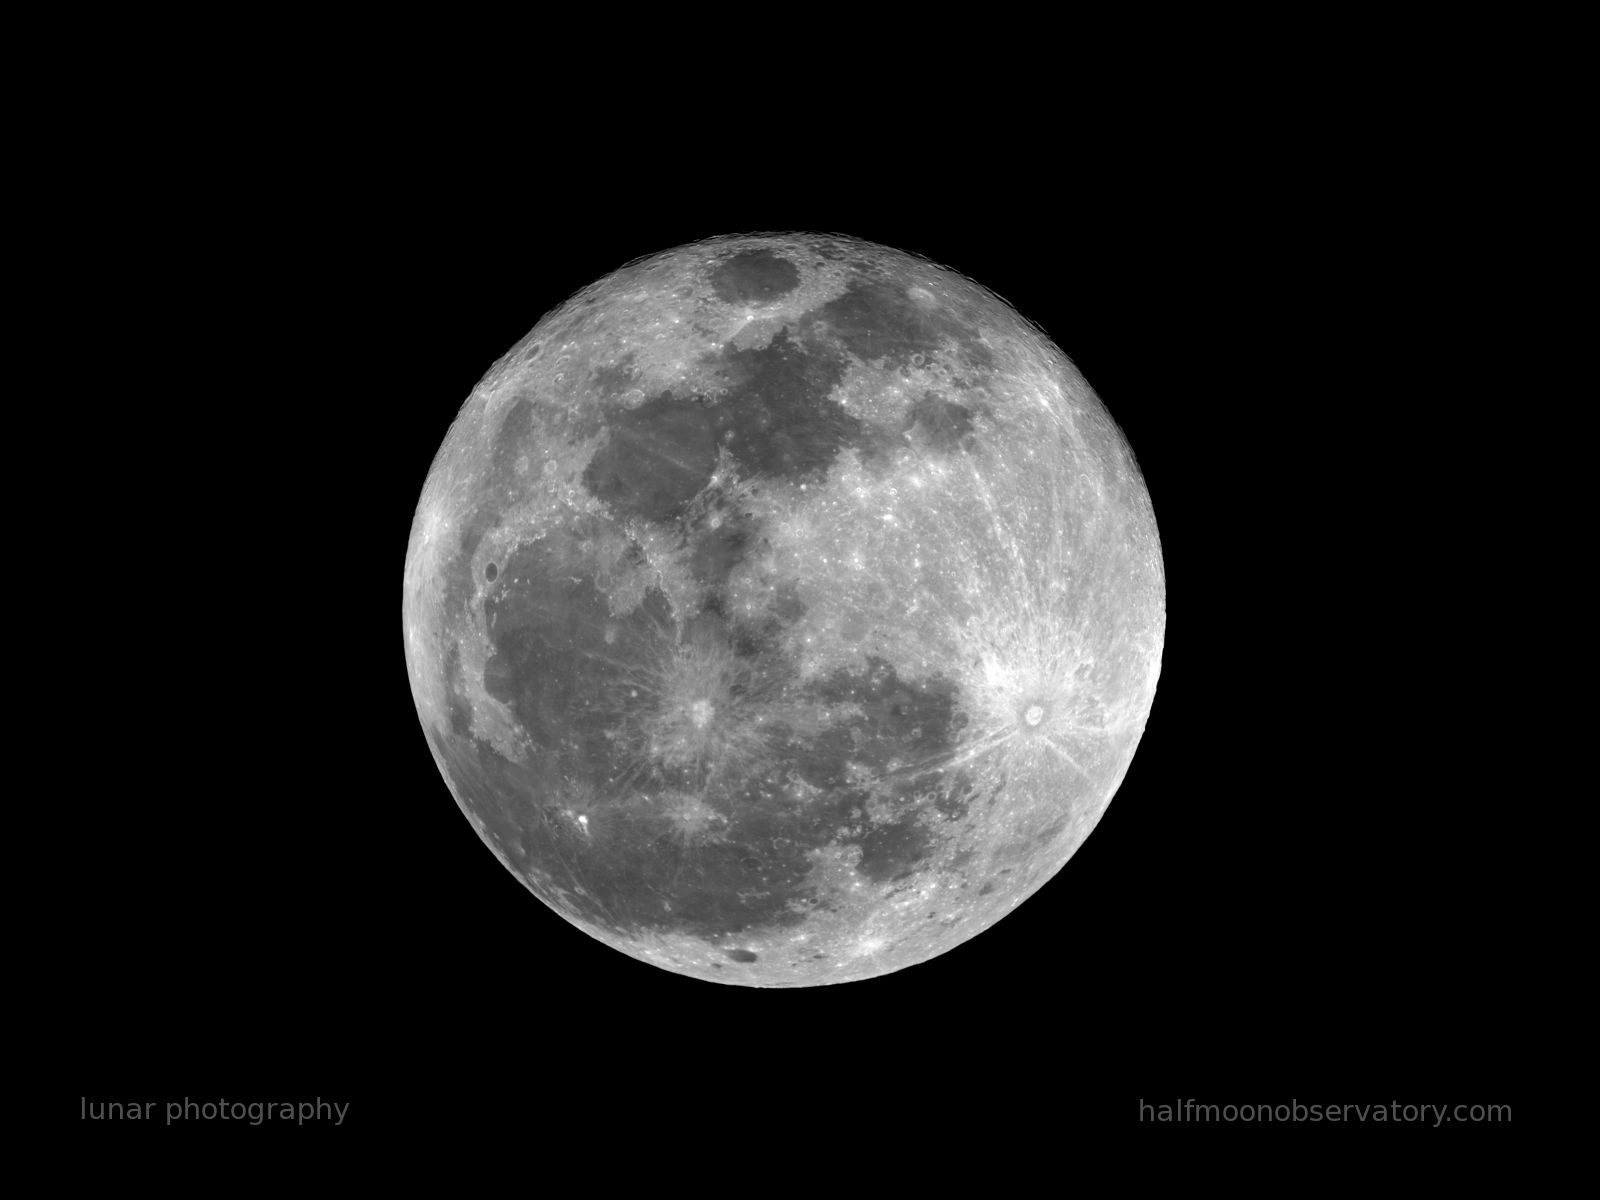 moon wallpaper full hd,moon,photograph,nature,monochrome photography,black and white